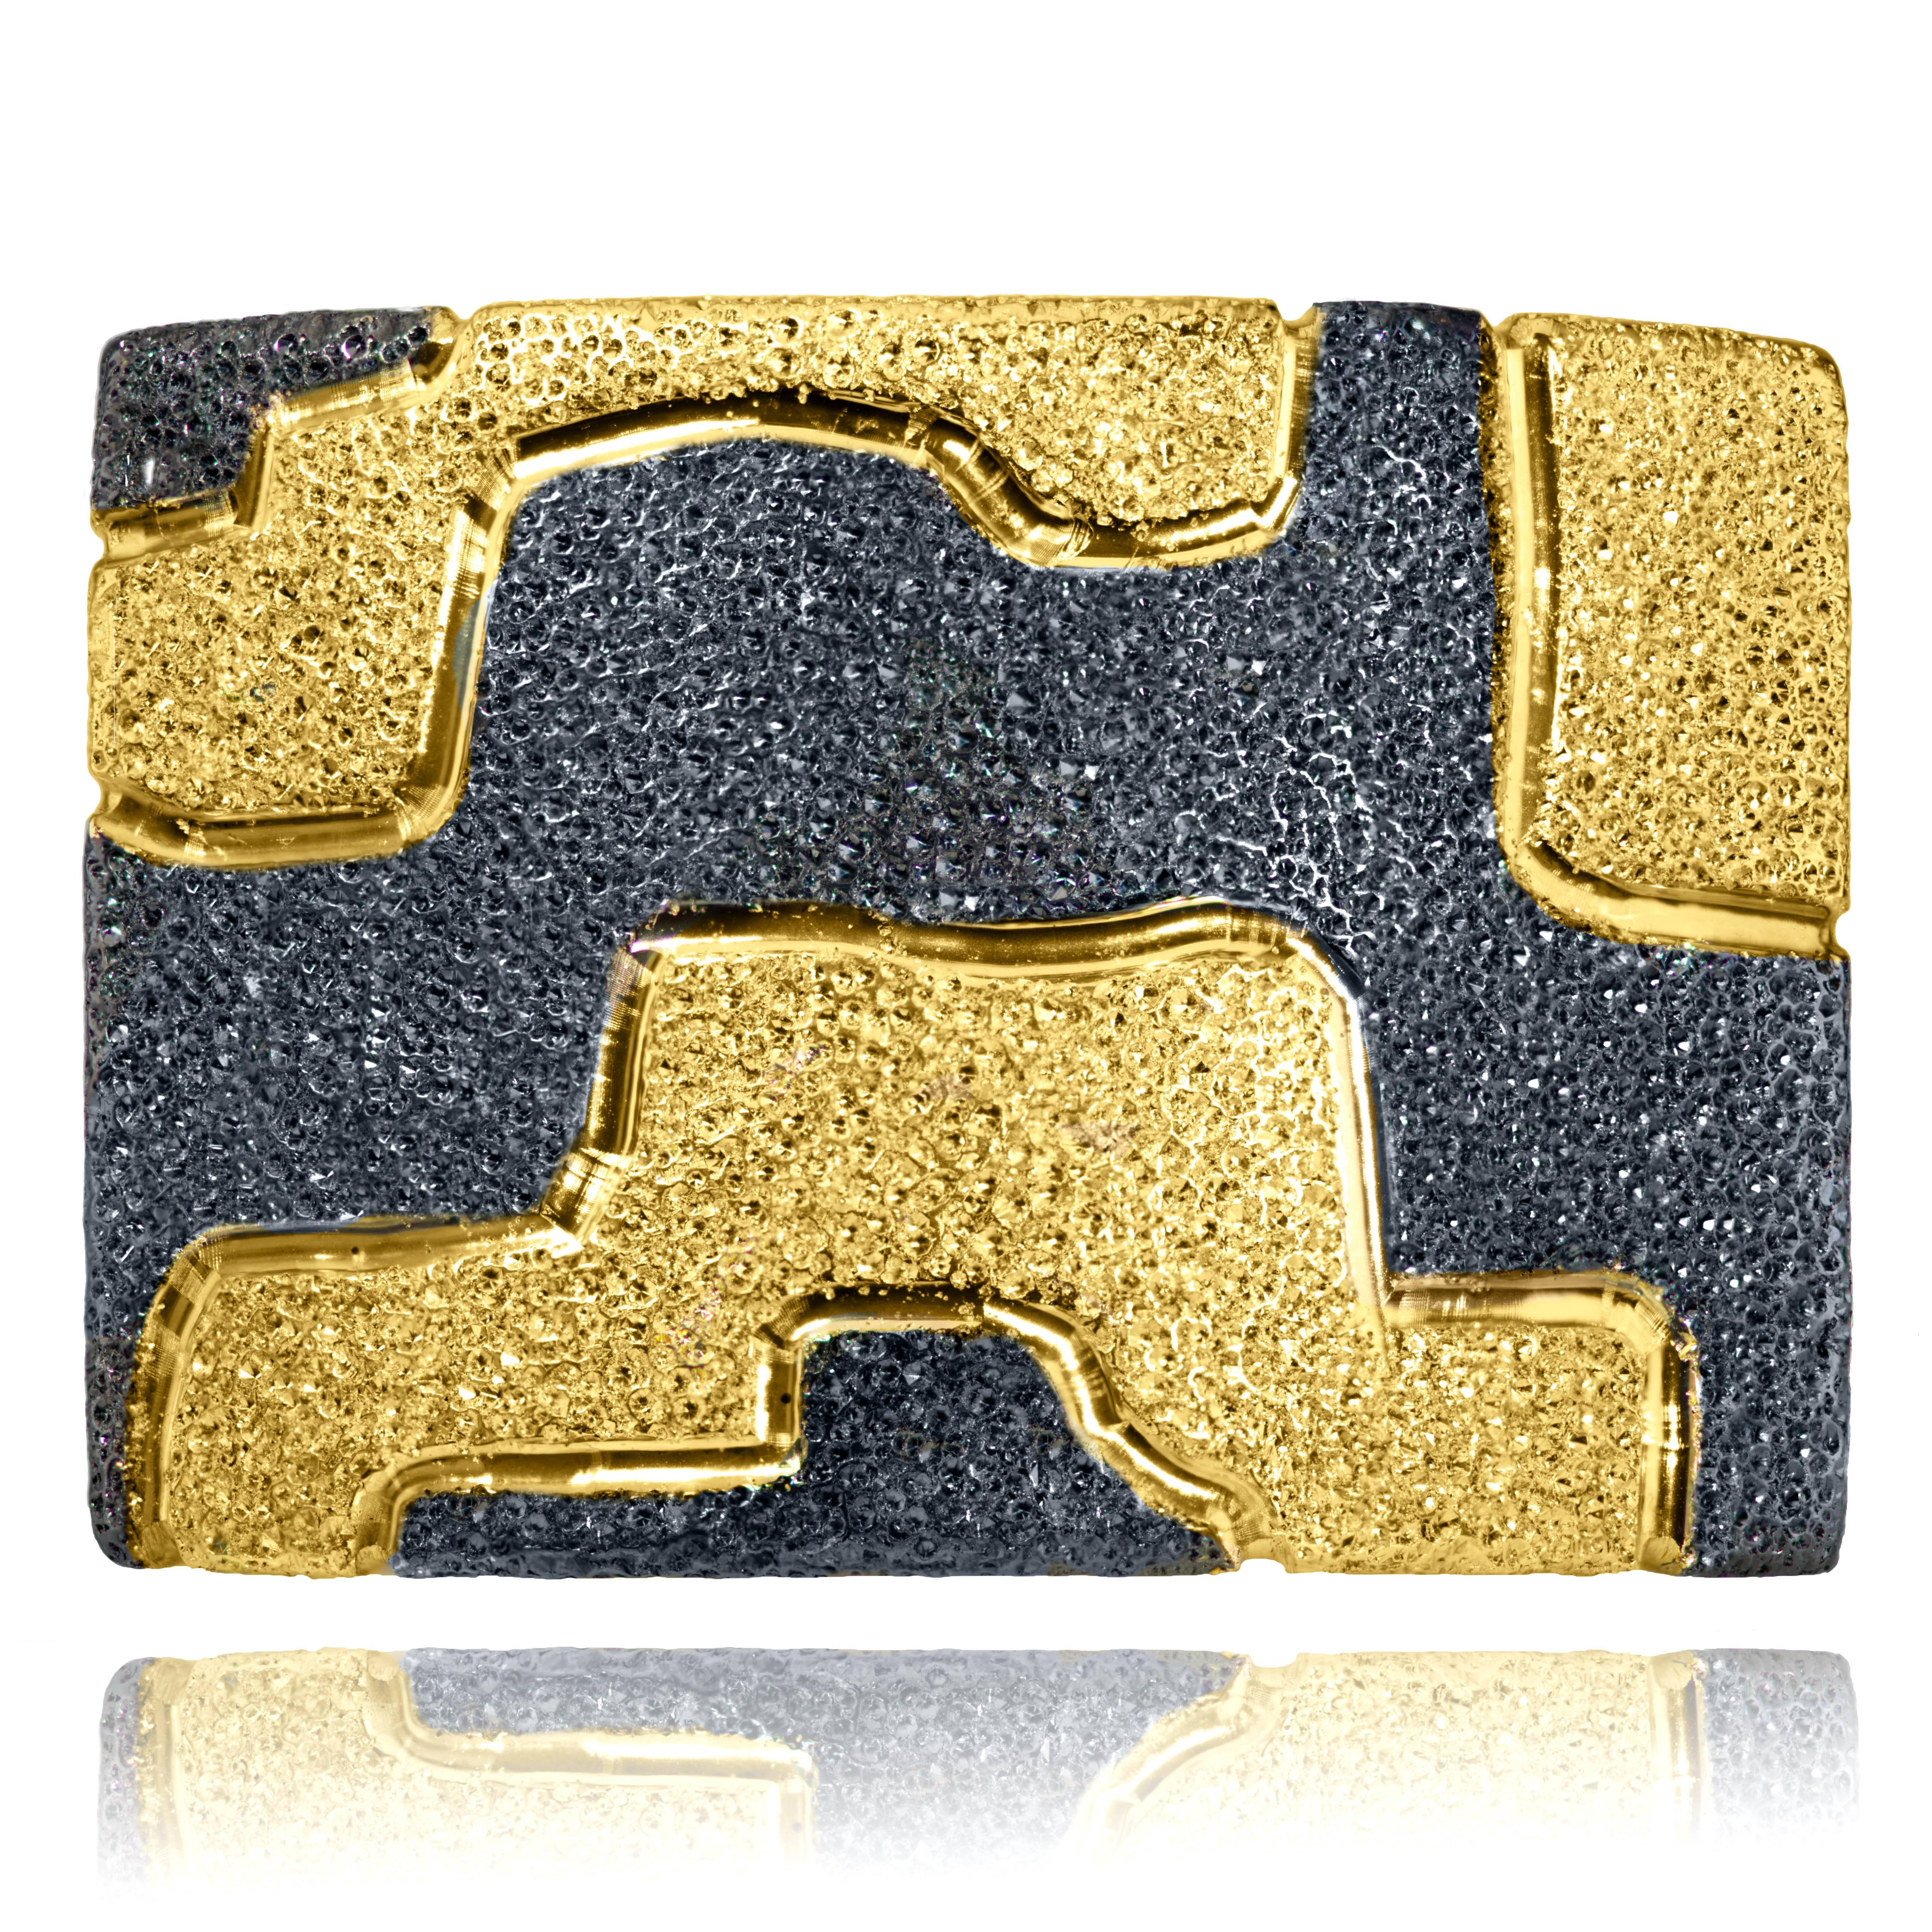 Alex Soldier Crossroad ring is made in silver with 24k yellow gold and dark platinum (rhodium) infusion (deep plating). Handmade in NYC, it features proprietary metalwork that creates an illusion of a diamond inlay. Size 6.5. Complimentary ring